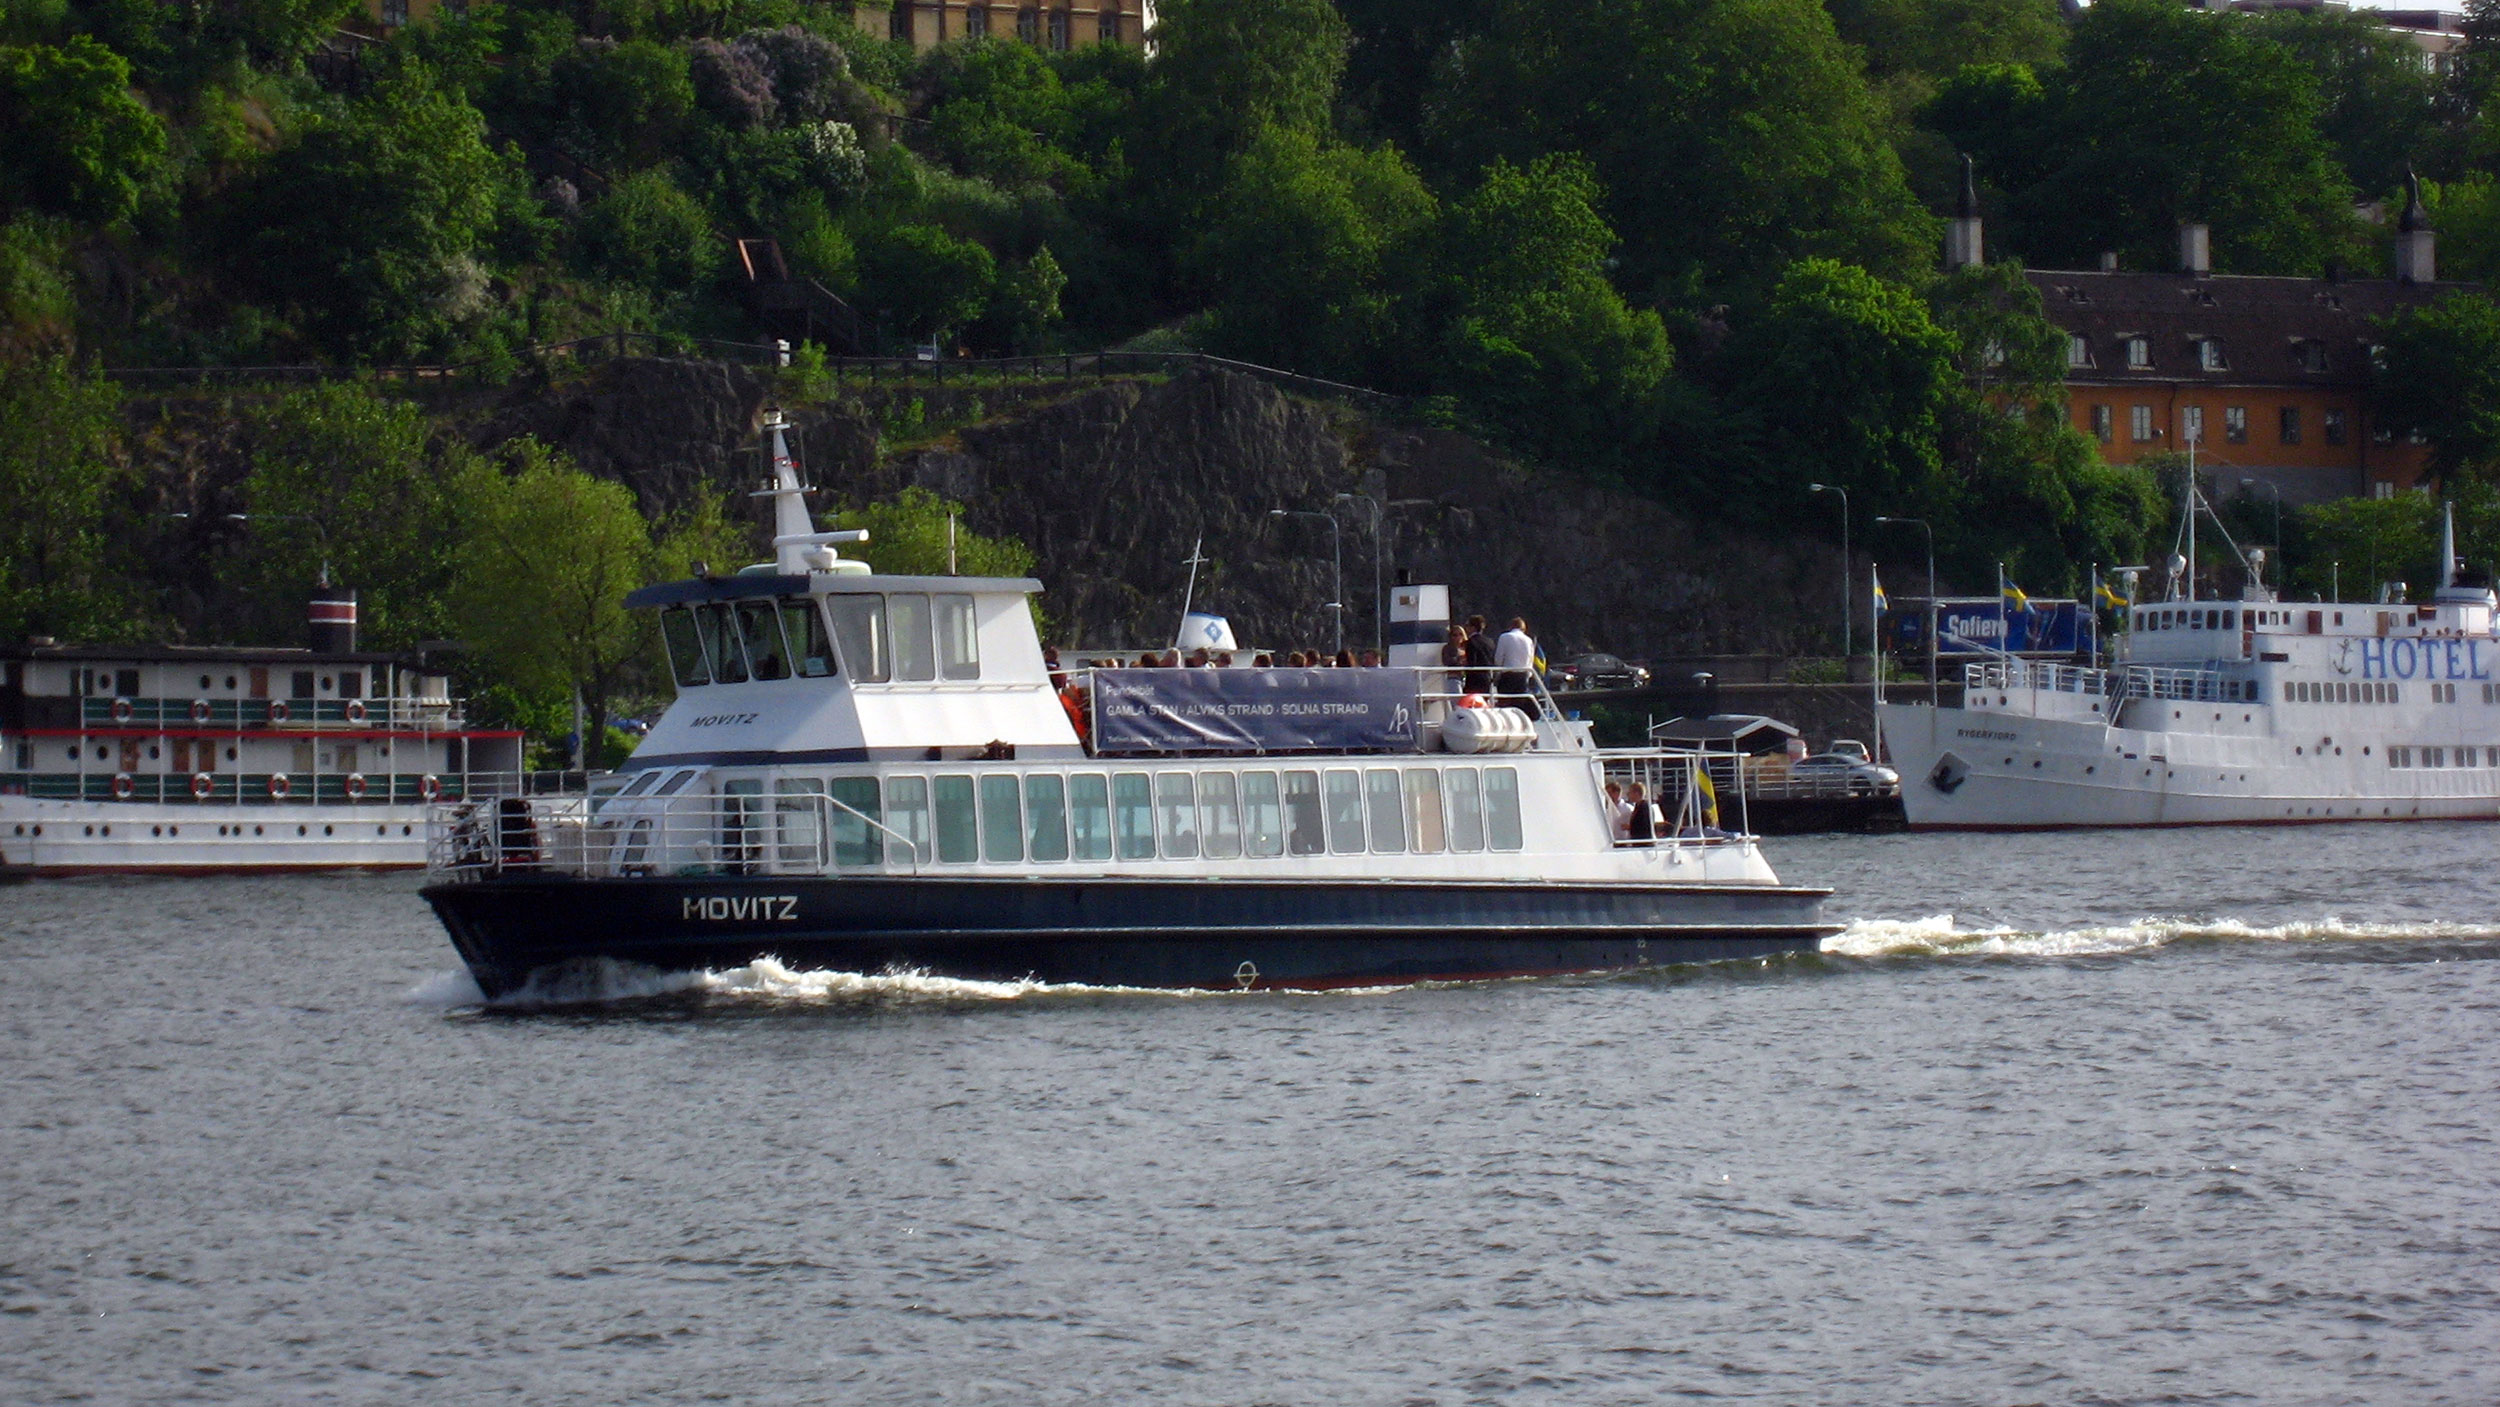 It Takes Merely 10 Minutes to Fully Charge This New 75-Foot Electric Ferry